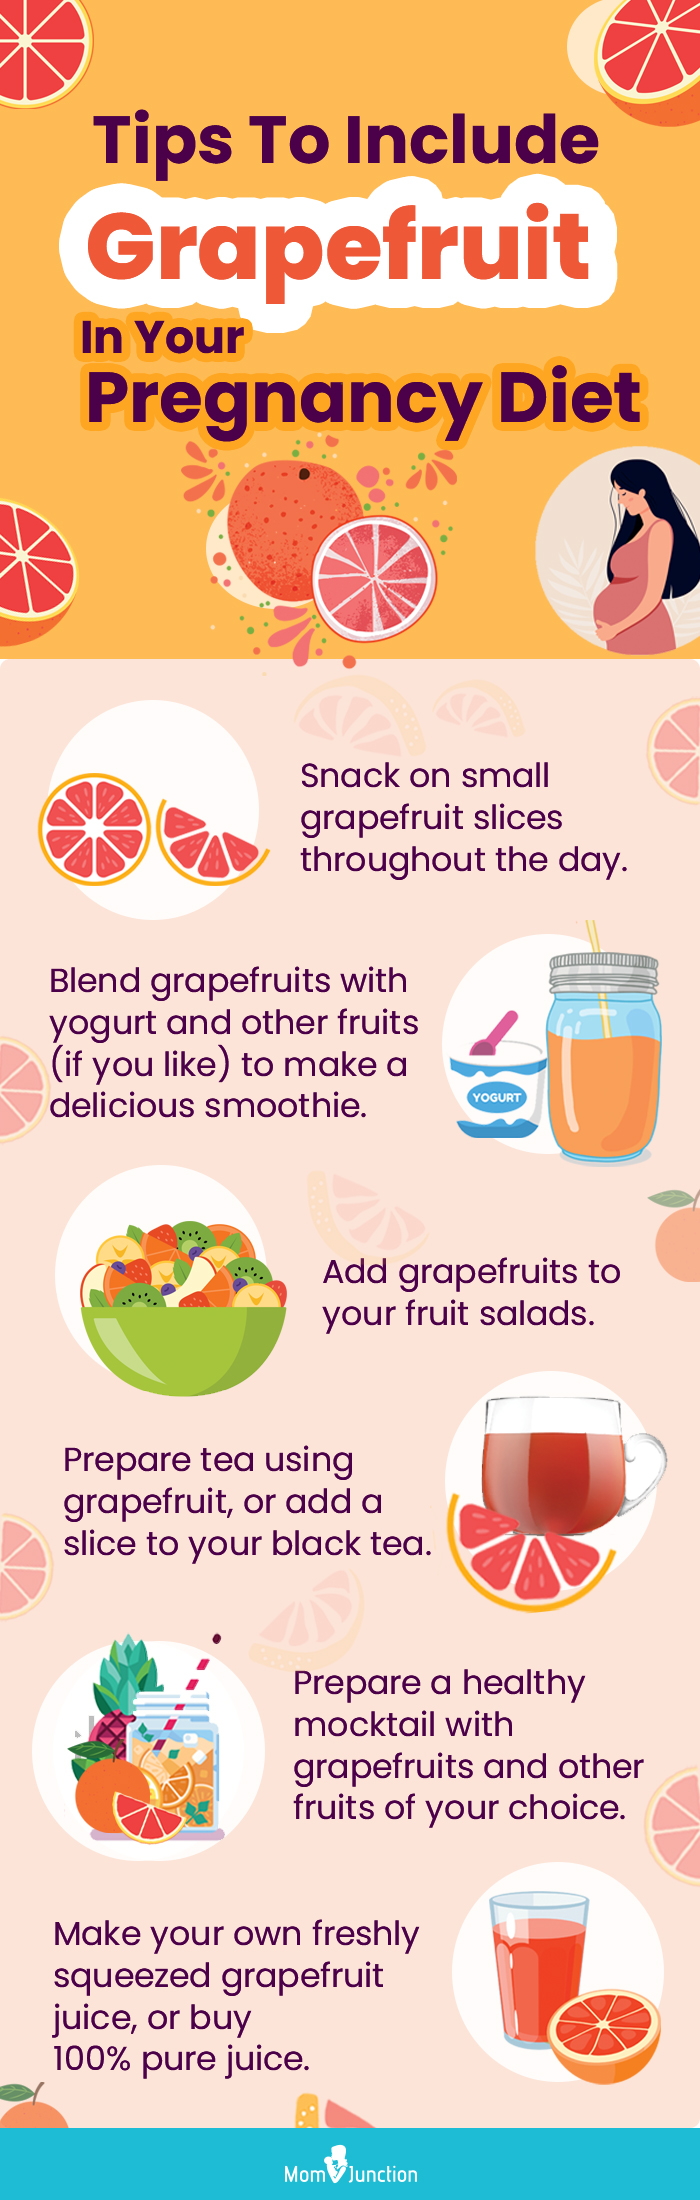 tips to include grapefruit in your pregnancy diet (infographic)